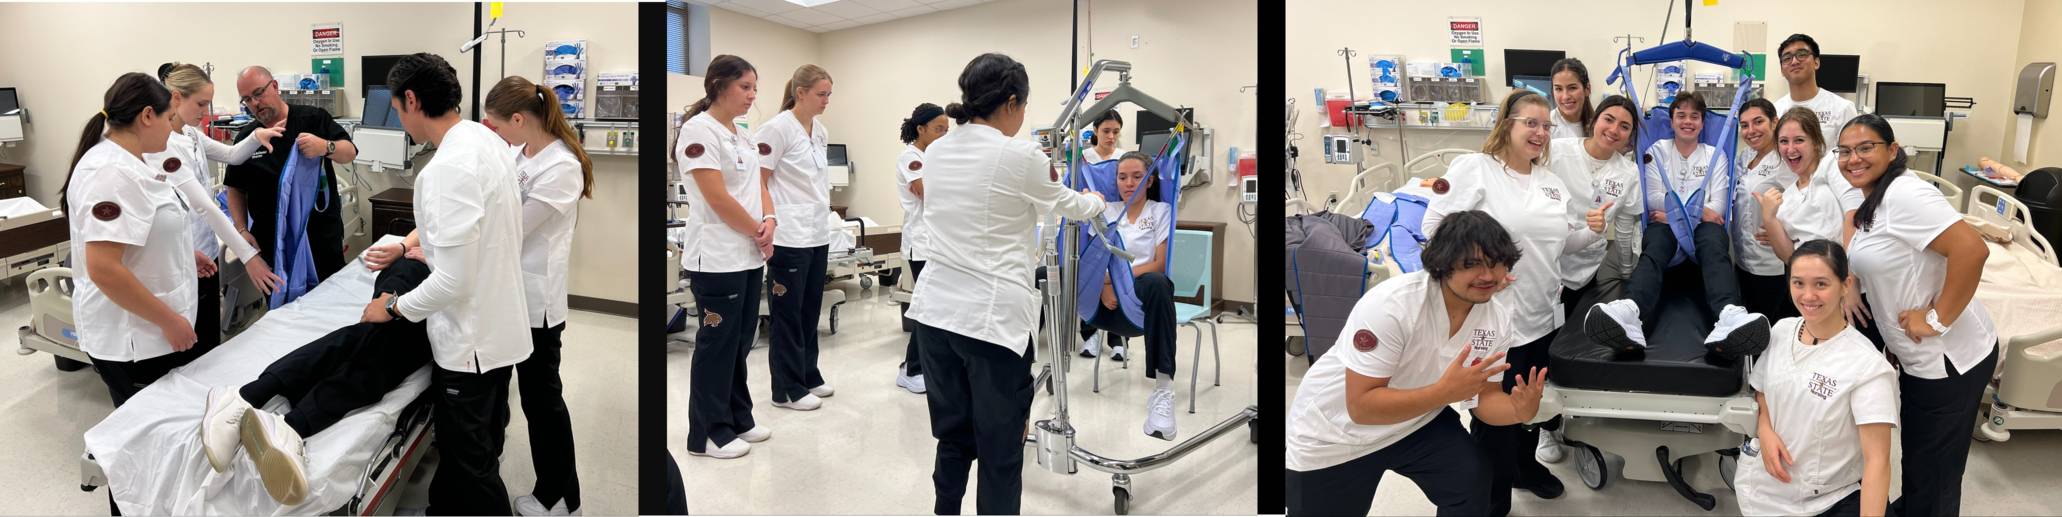 Nursing students practicing patient mobility in sim lab